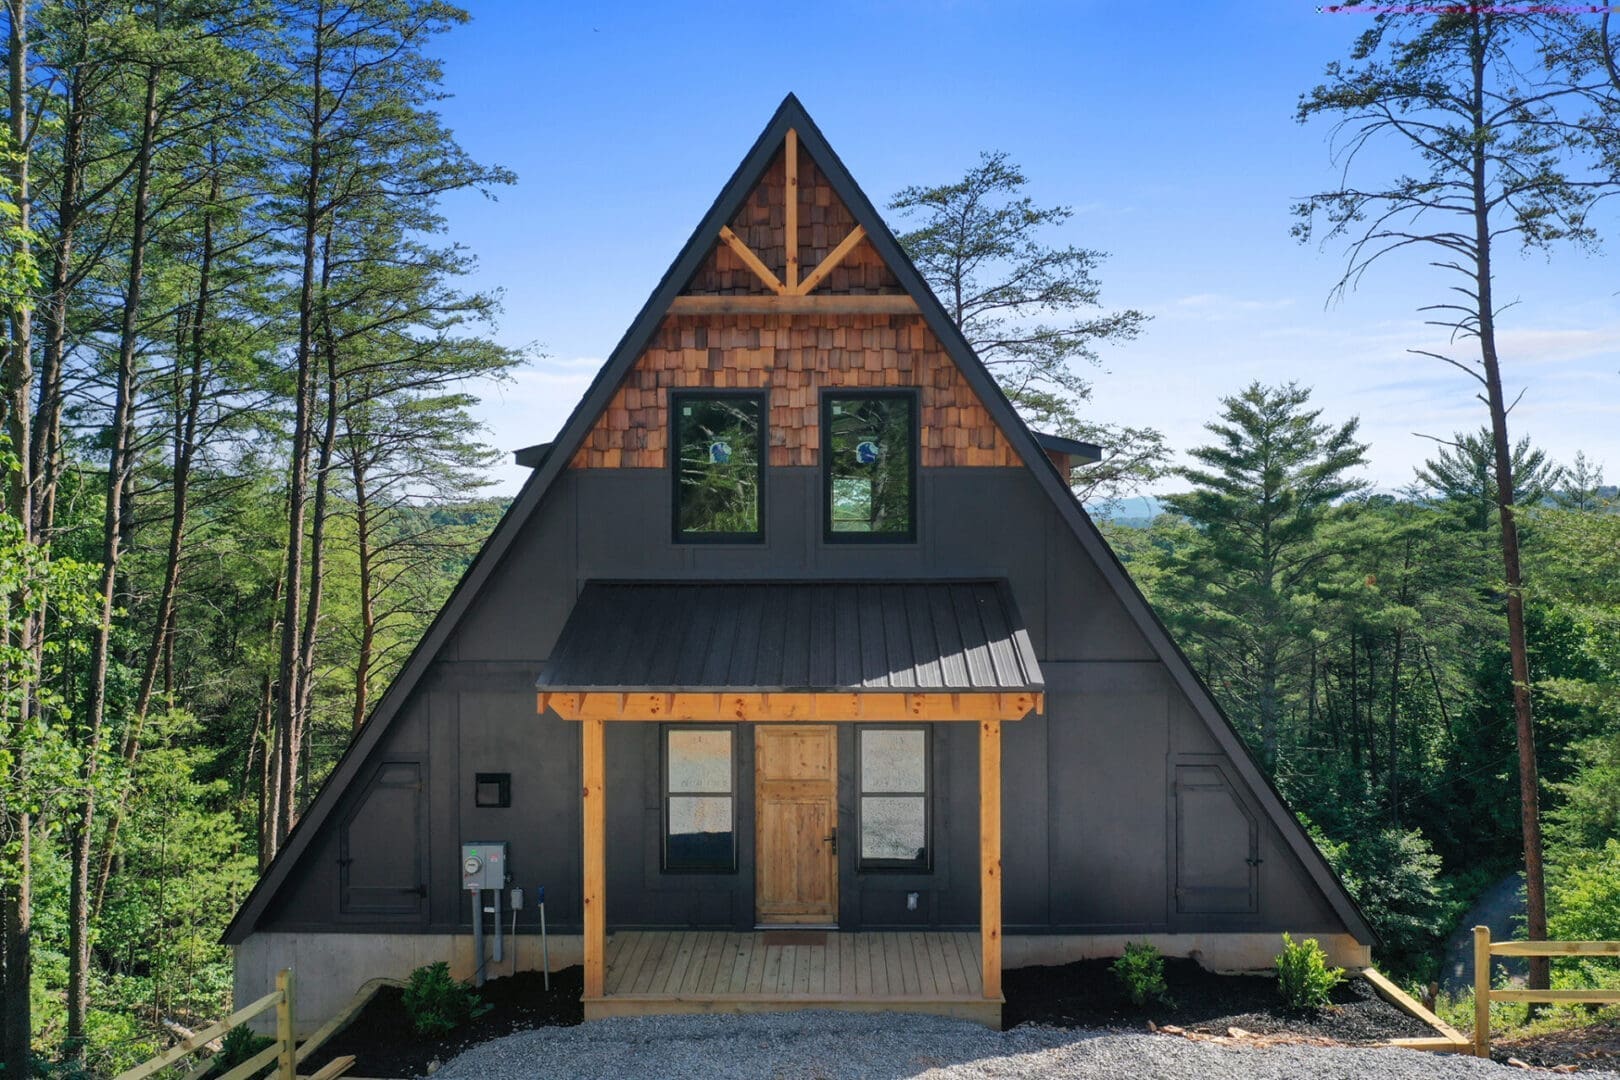 Architectural Design Services: A black a-frame house in the woods.